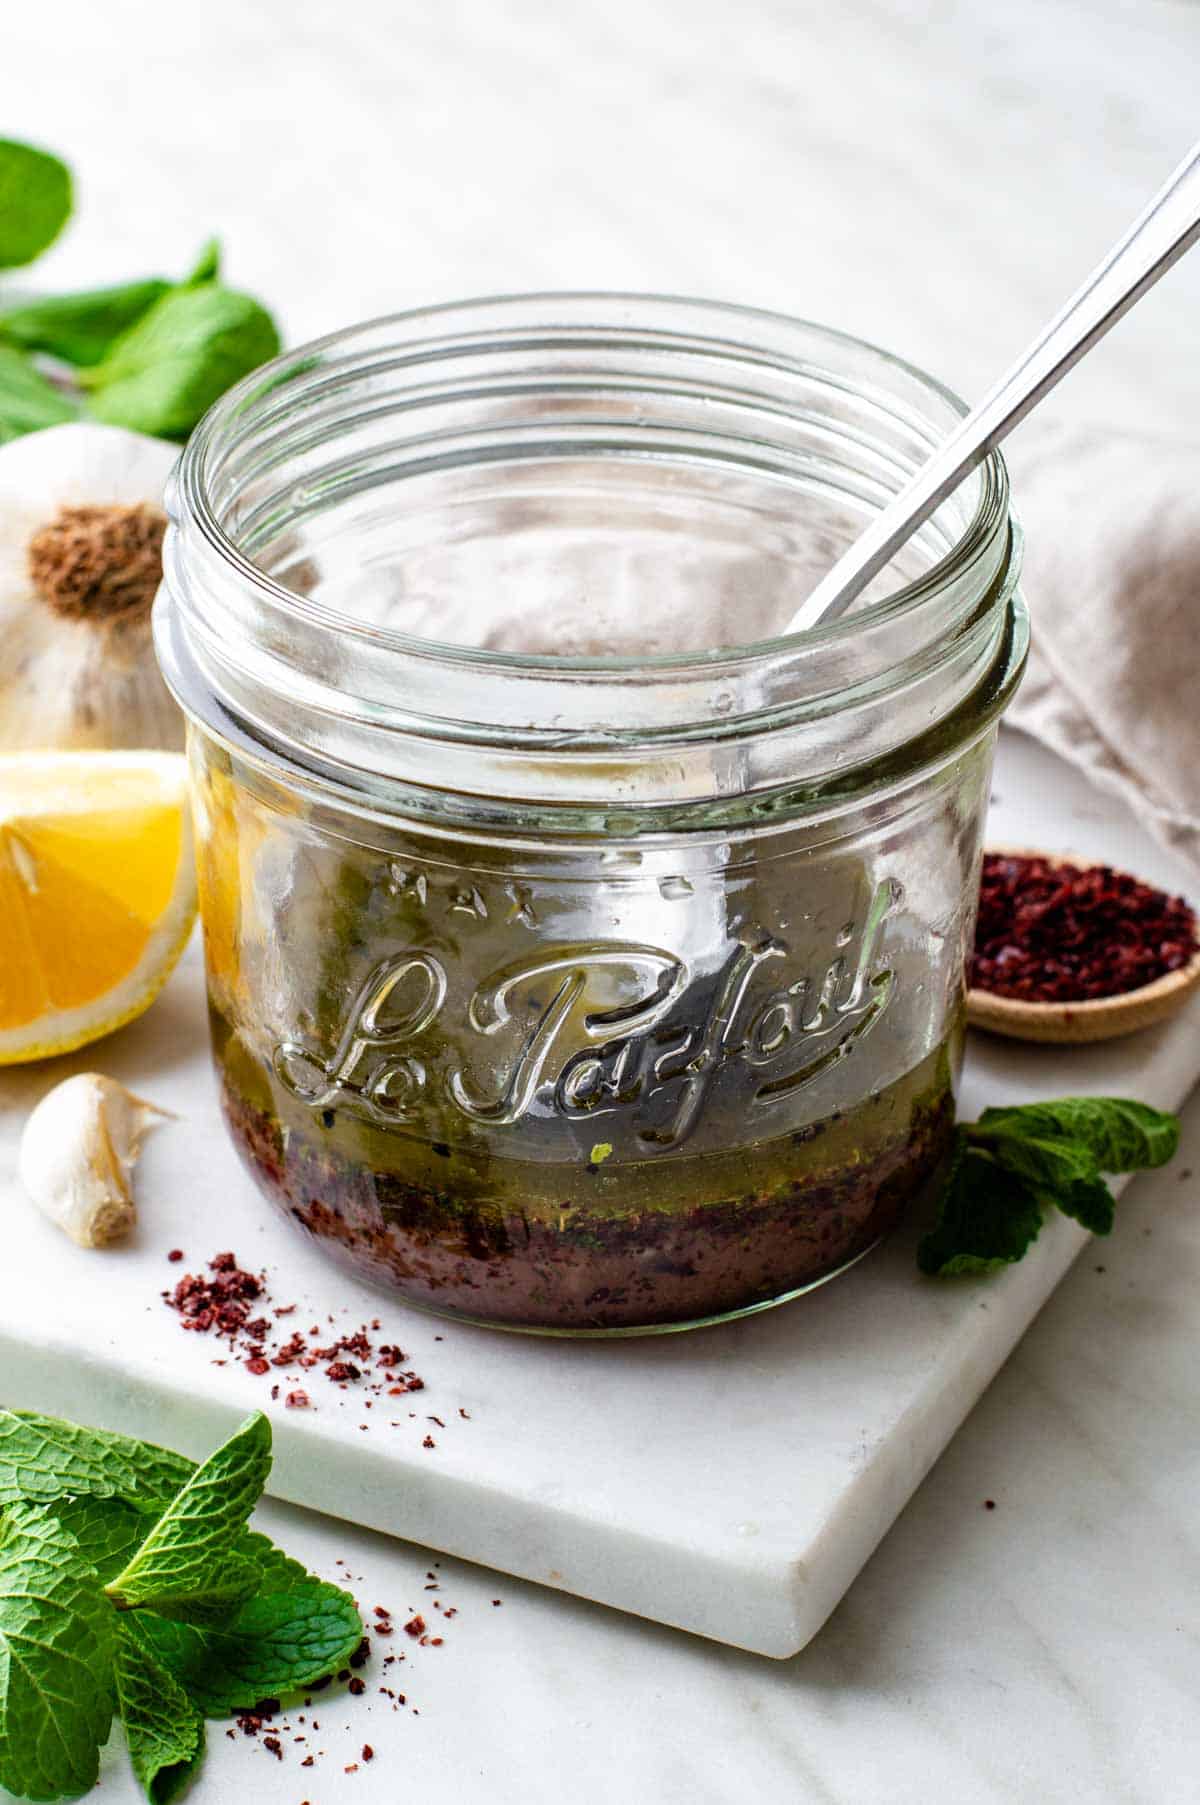 Sumac dressing served in a jar with a spoon in it.